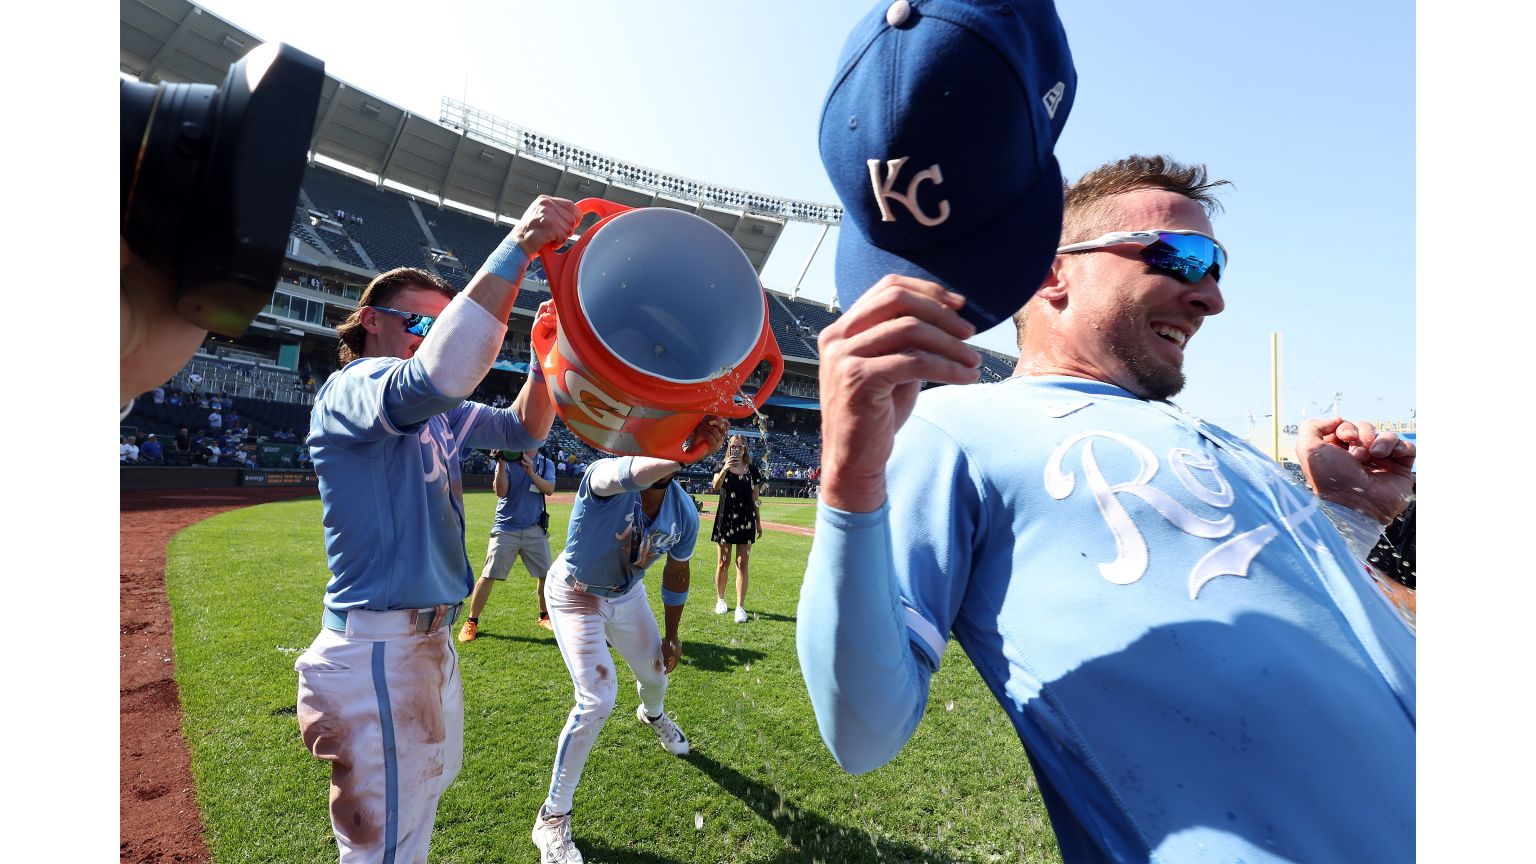 Get ready for July 4 with Kansas City Royals gear